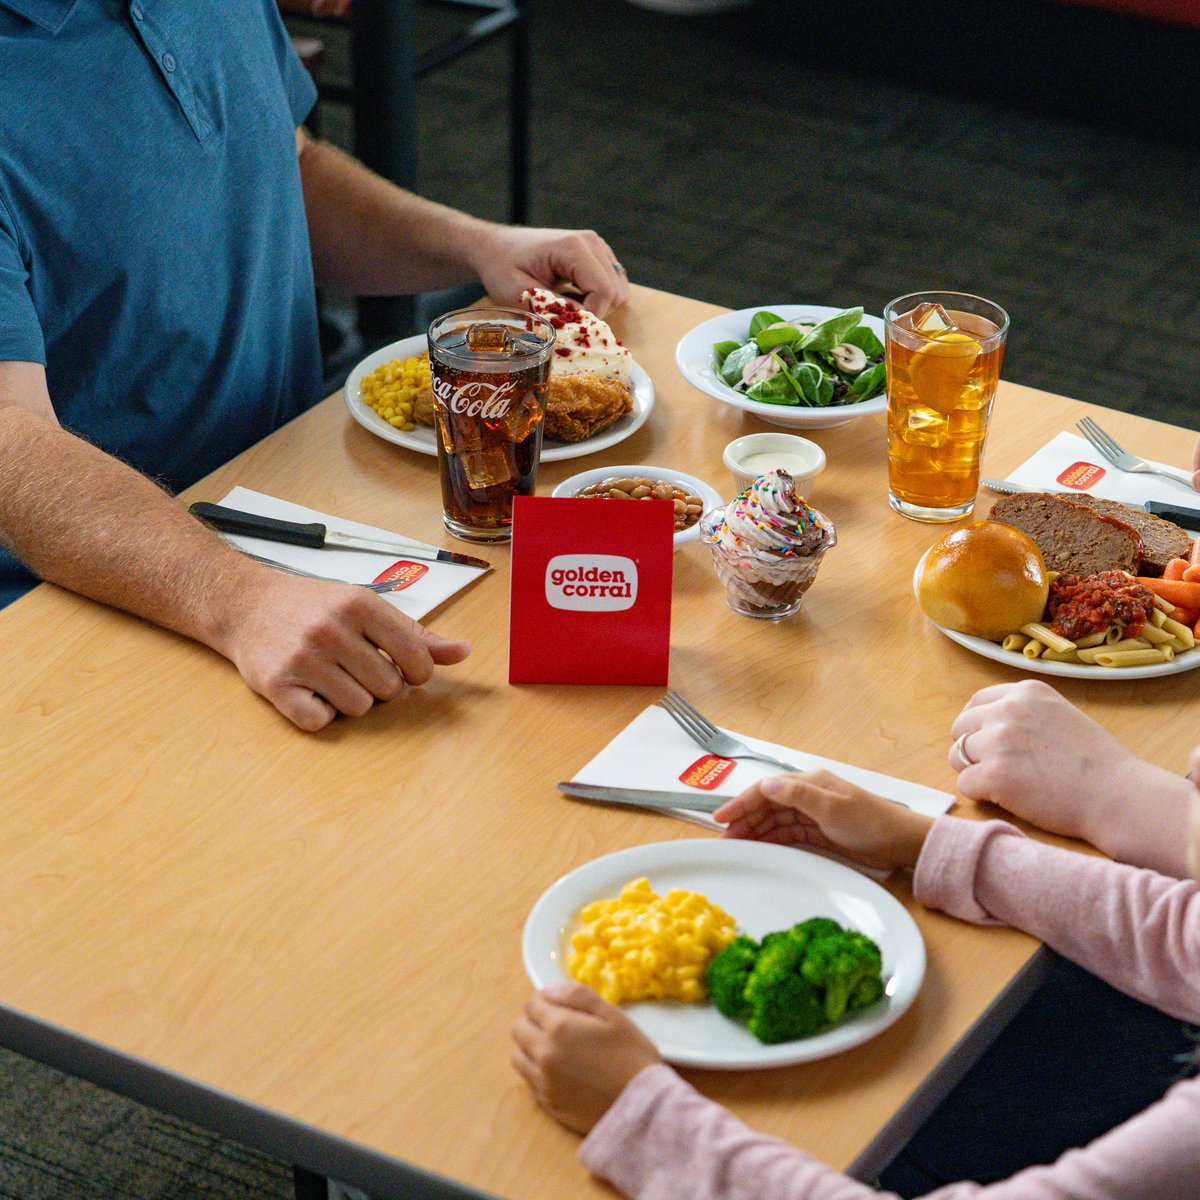 Bring the family! We've got incredible options for everybody to find their favorite.